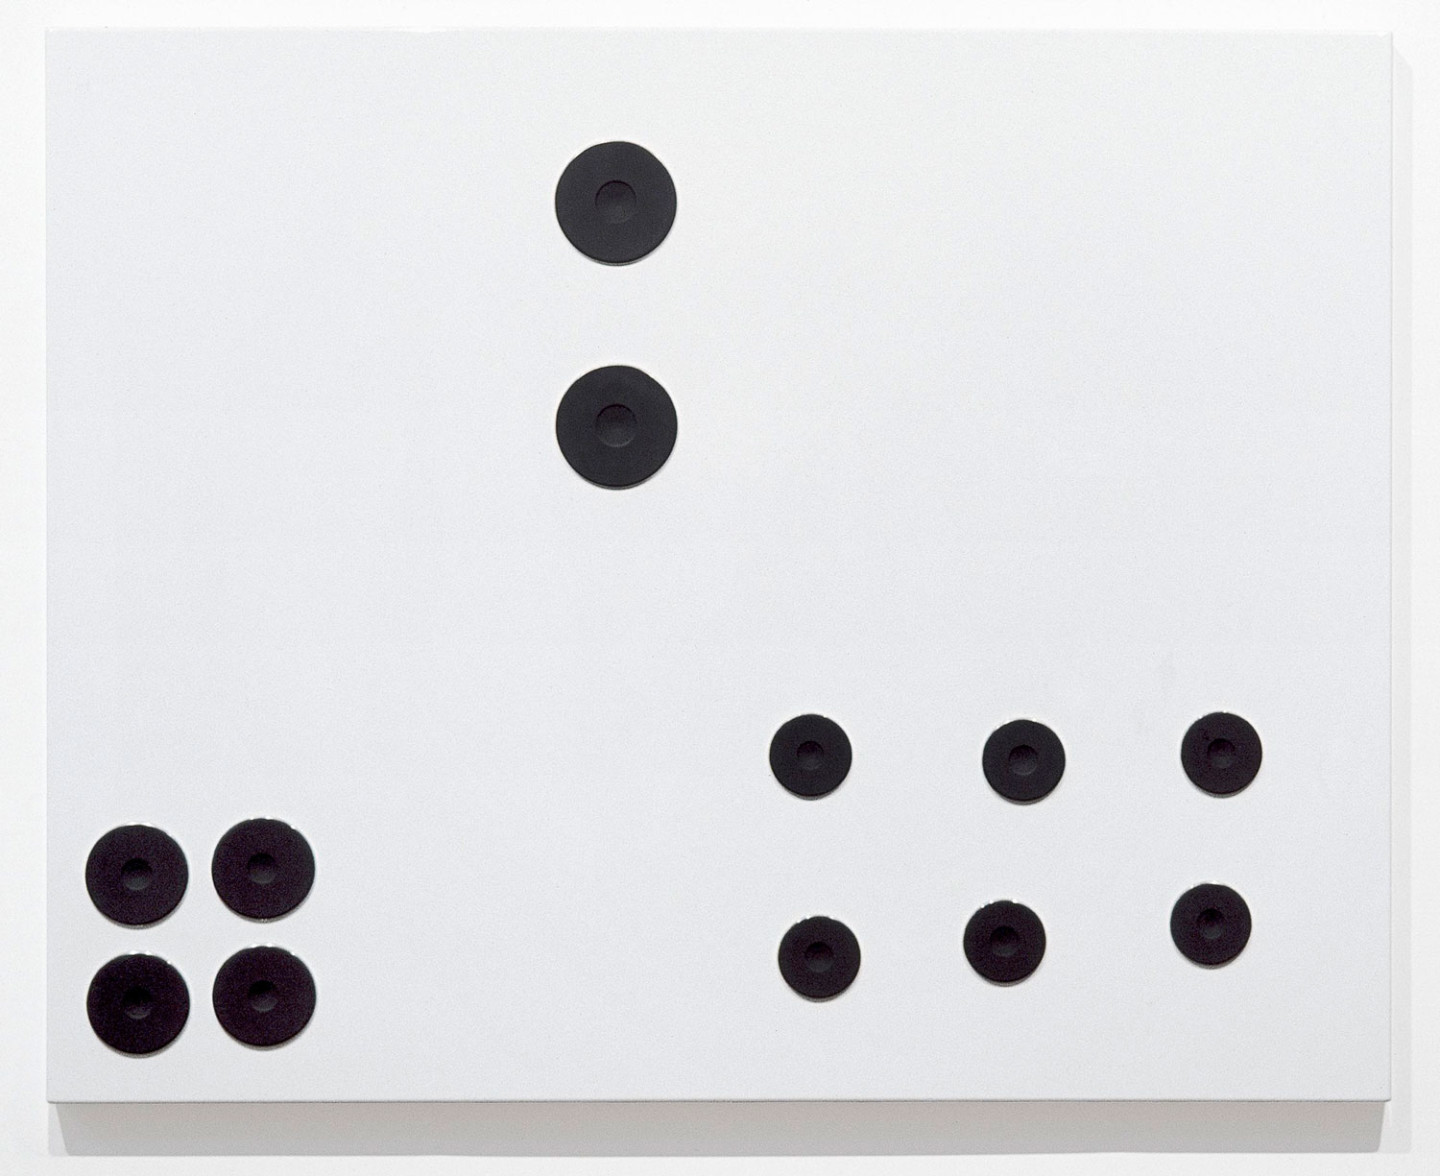 electric hotplates, set in a white, enamelled steel surface